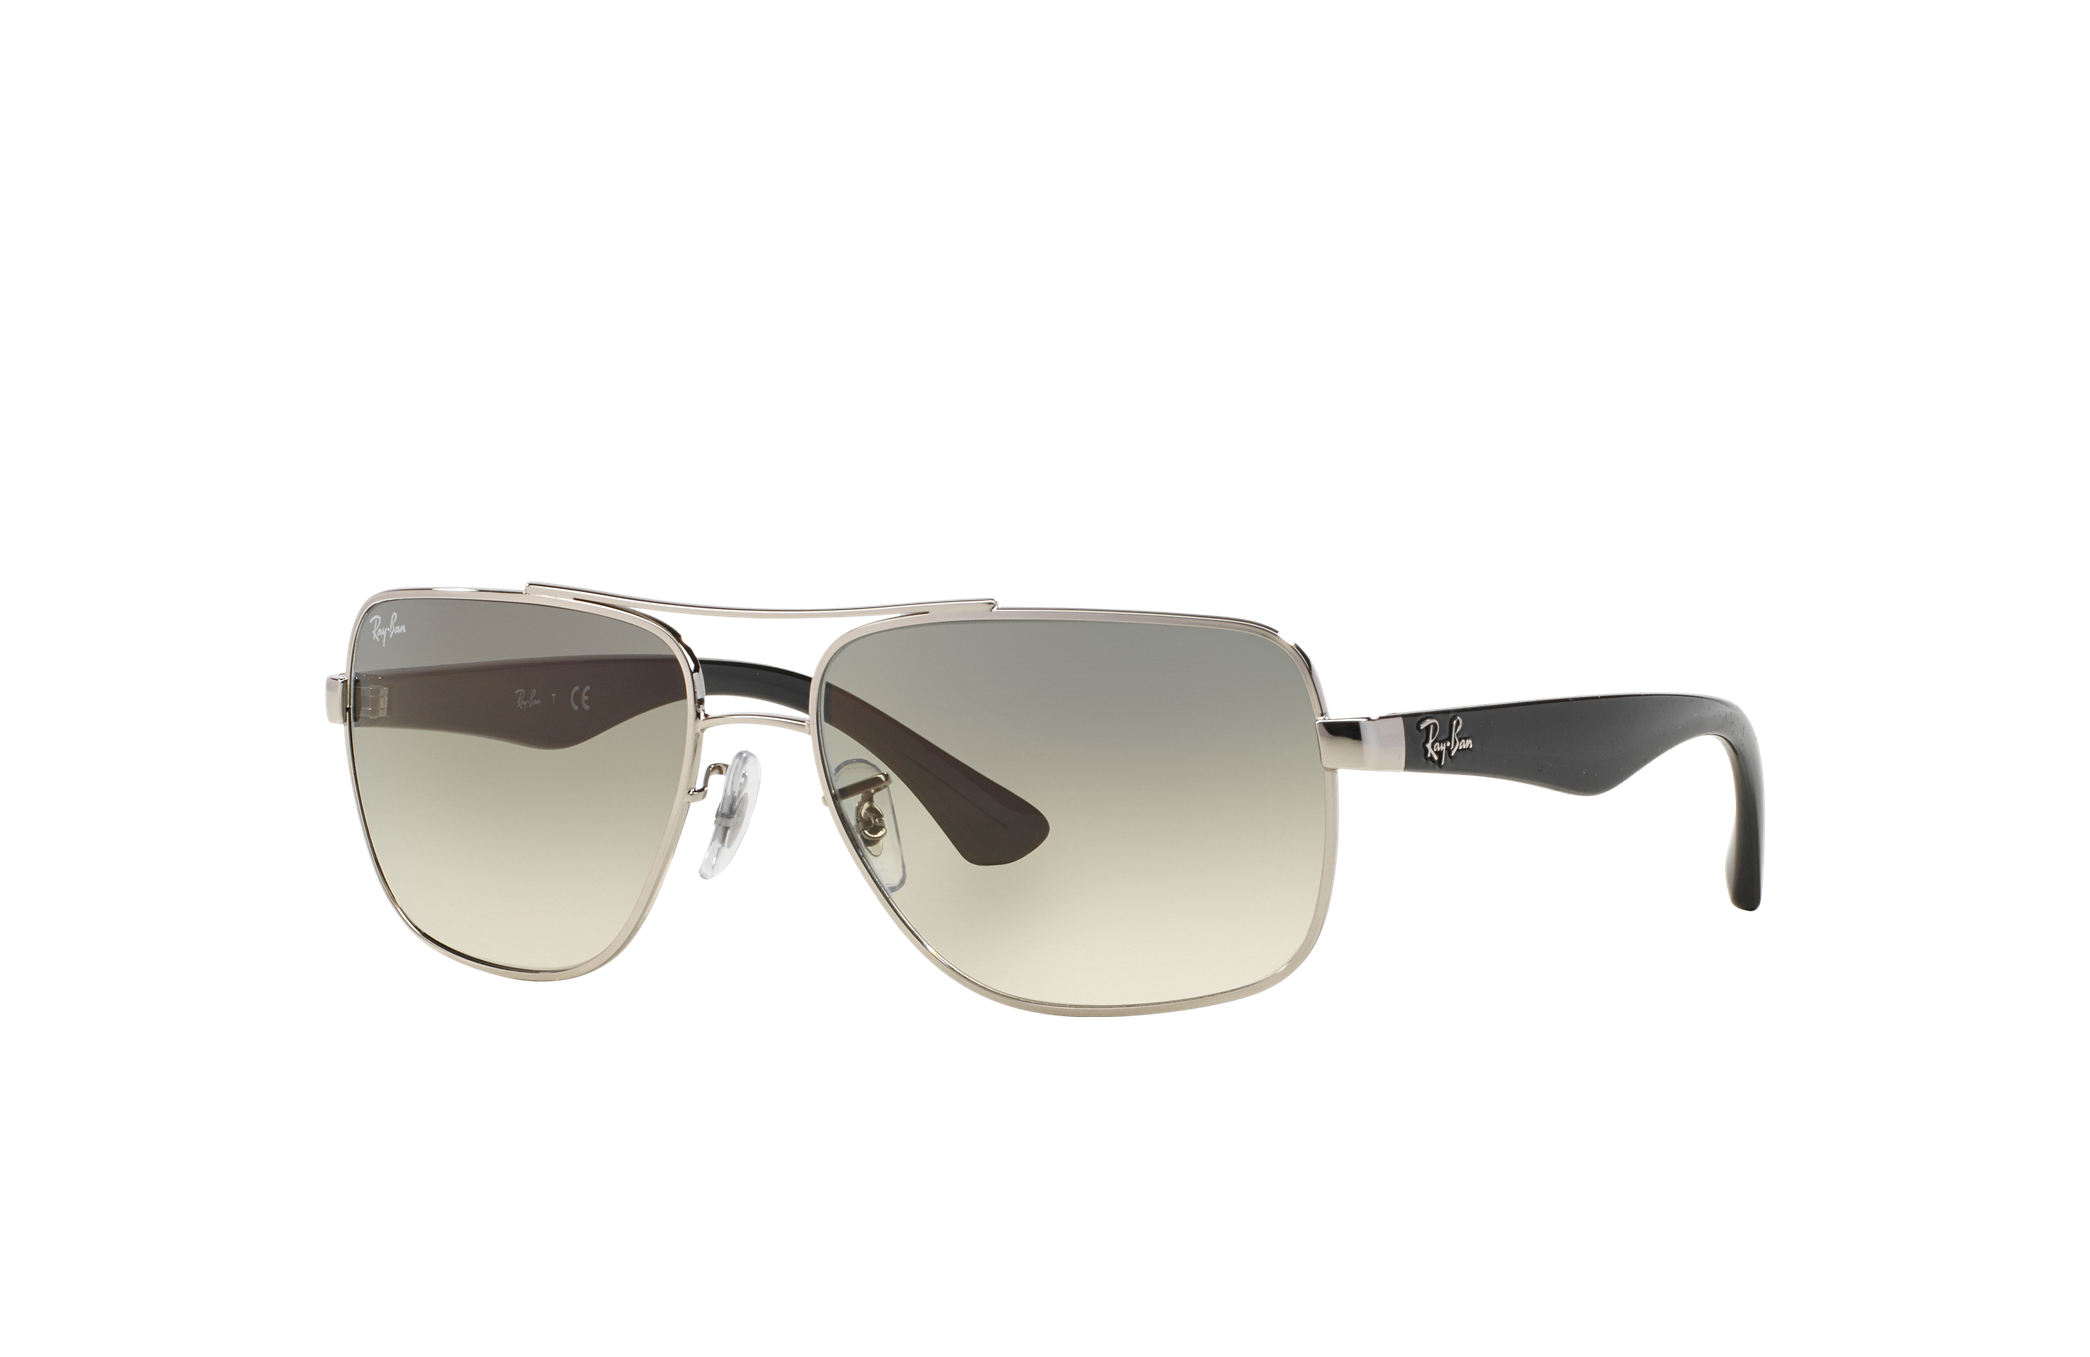 Rb3483 Sunglasses in Silver and Light Grey - RB3483 | Ray-Ban® US